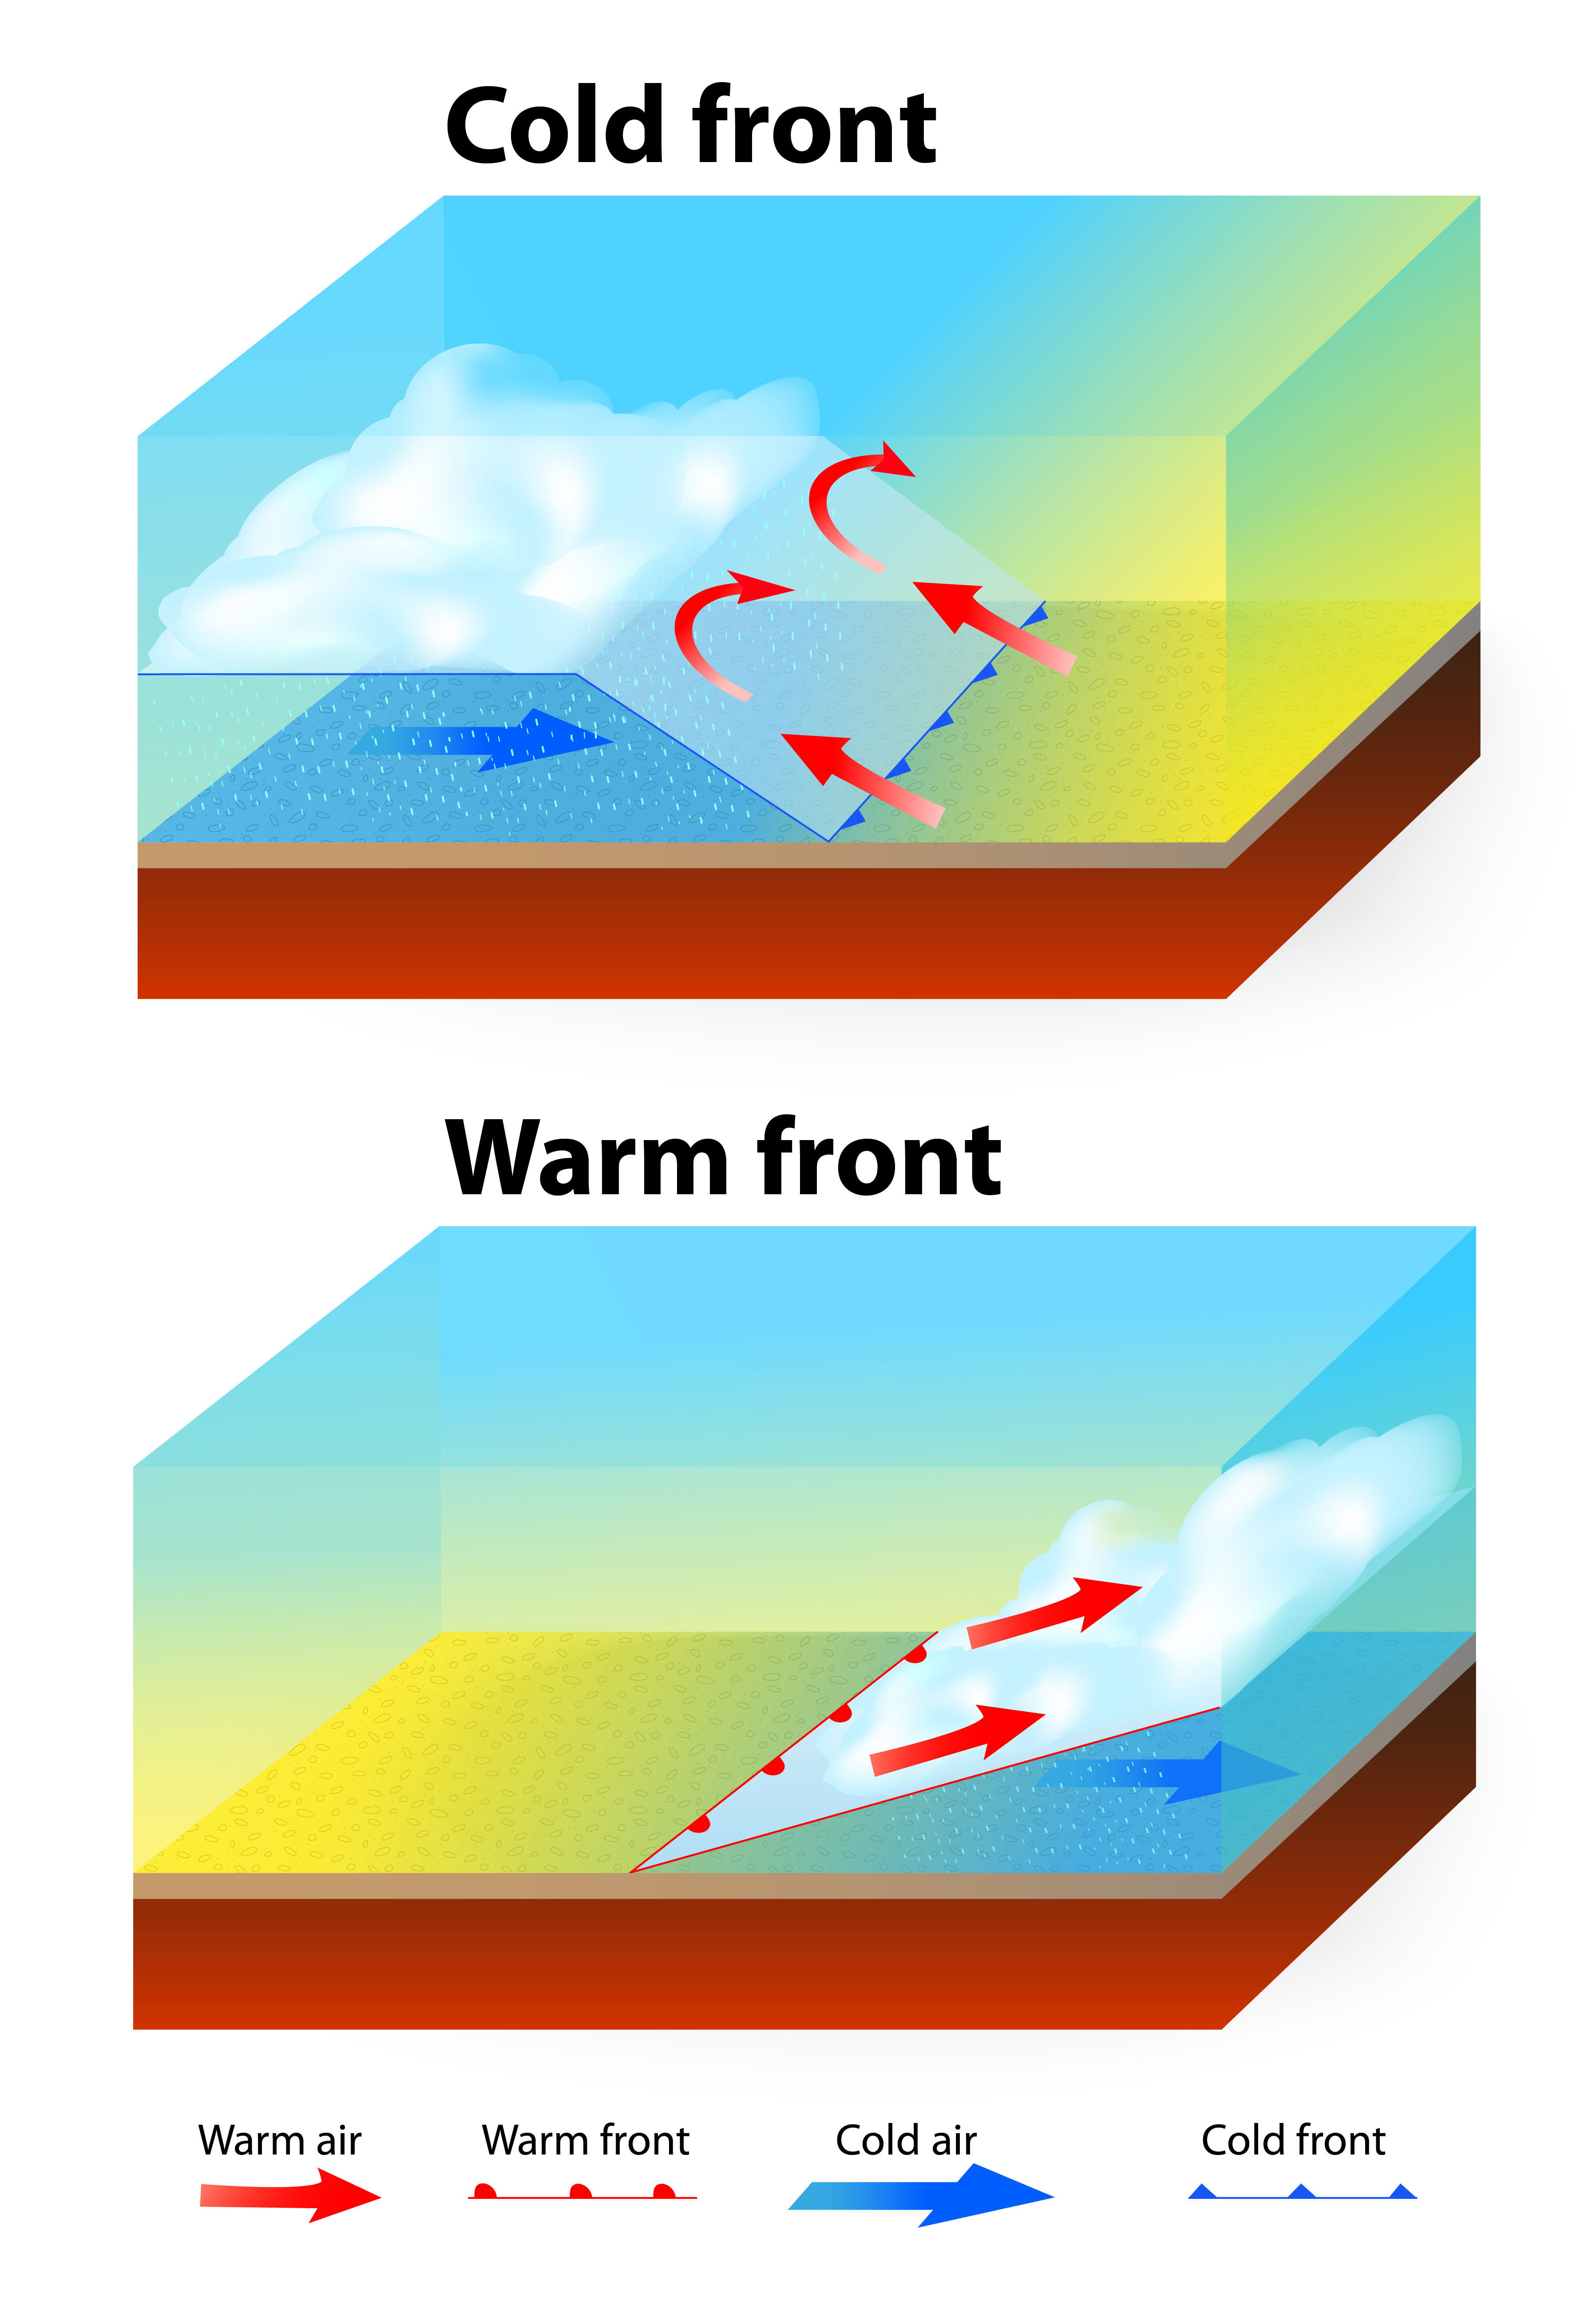 Cold front and warm front schematic